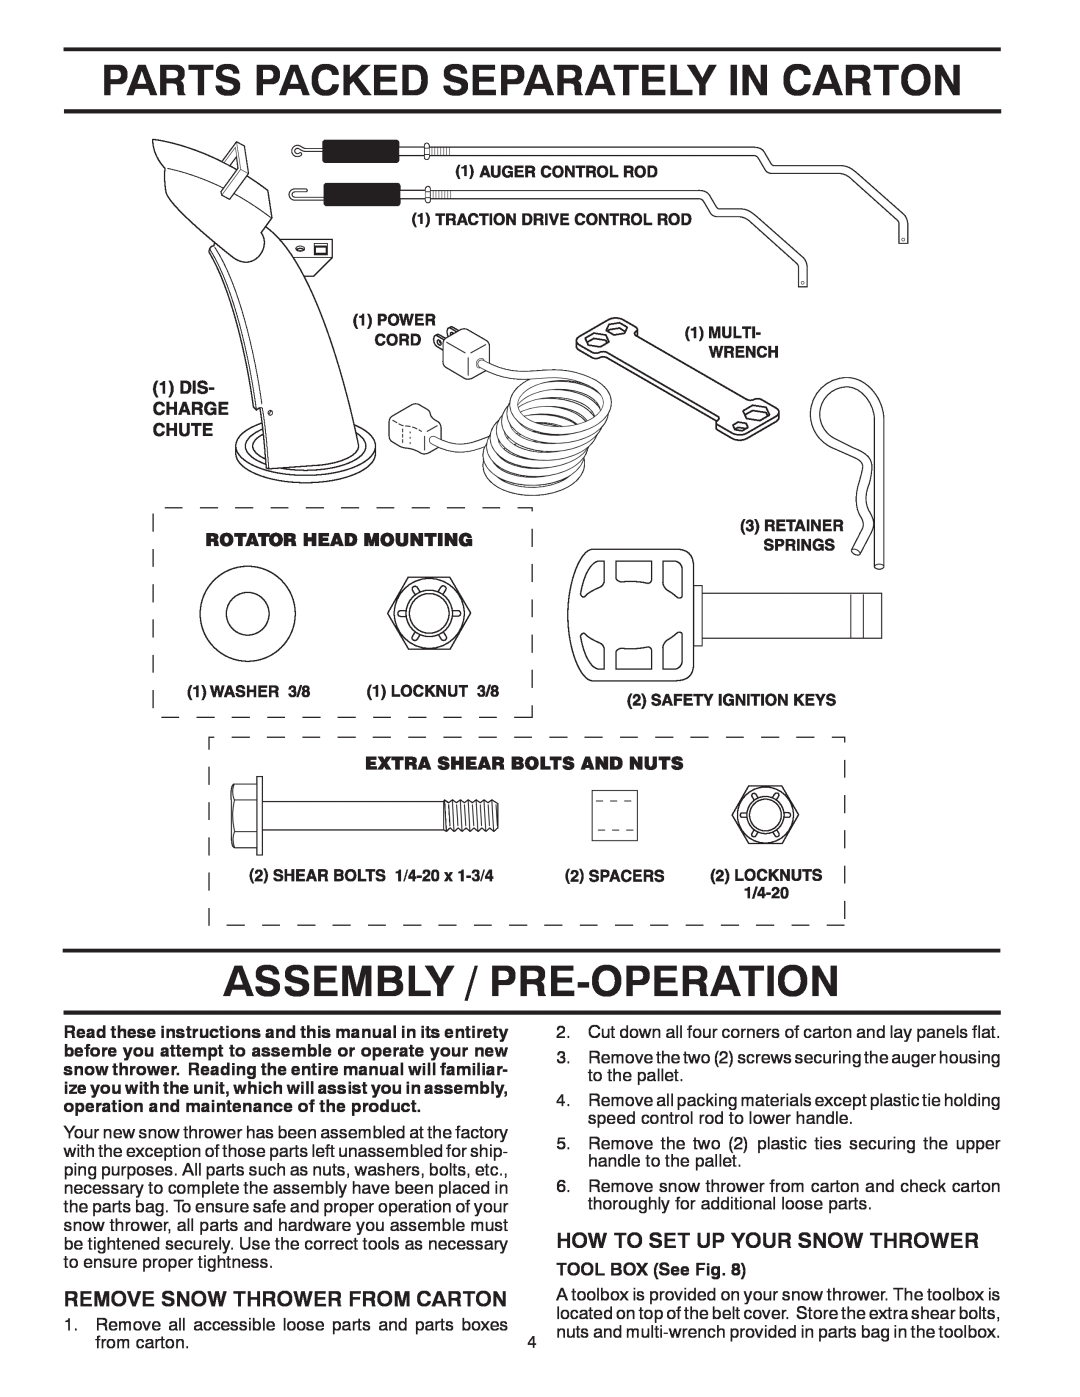 Poulan 414659 owner manual Parts Packed Separately In Carton, Assembly / Pre-Operation, How To Set Up Your Snow Thrower 